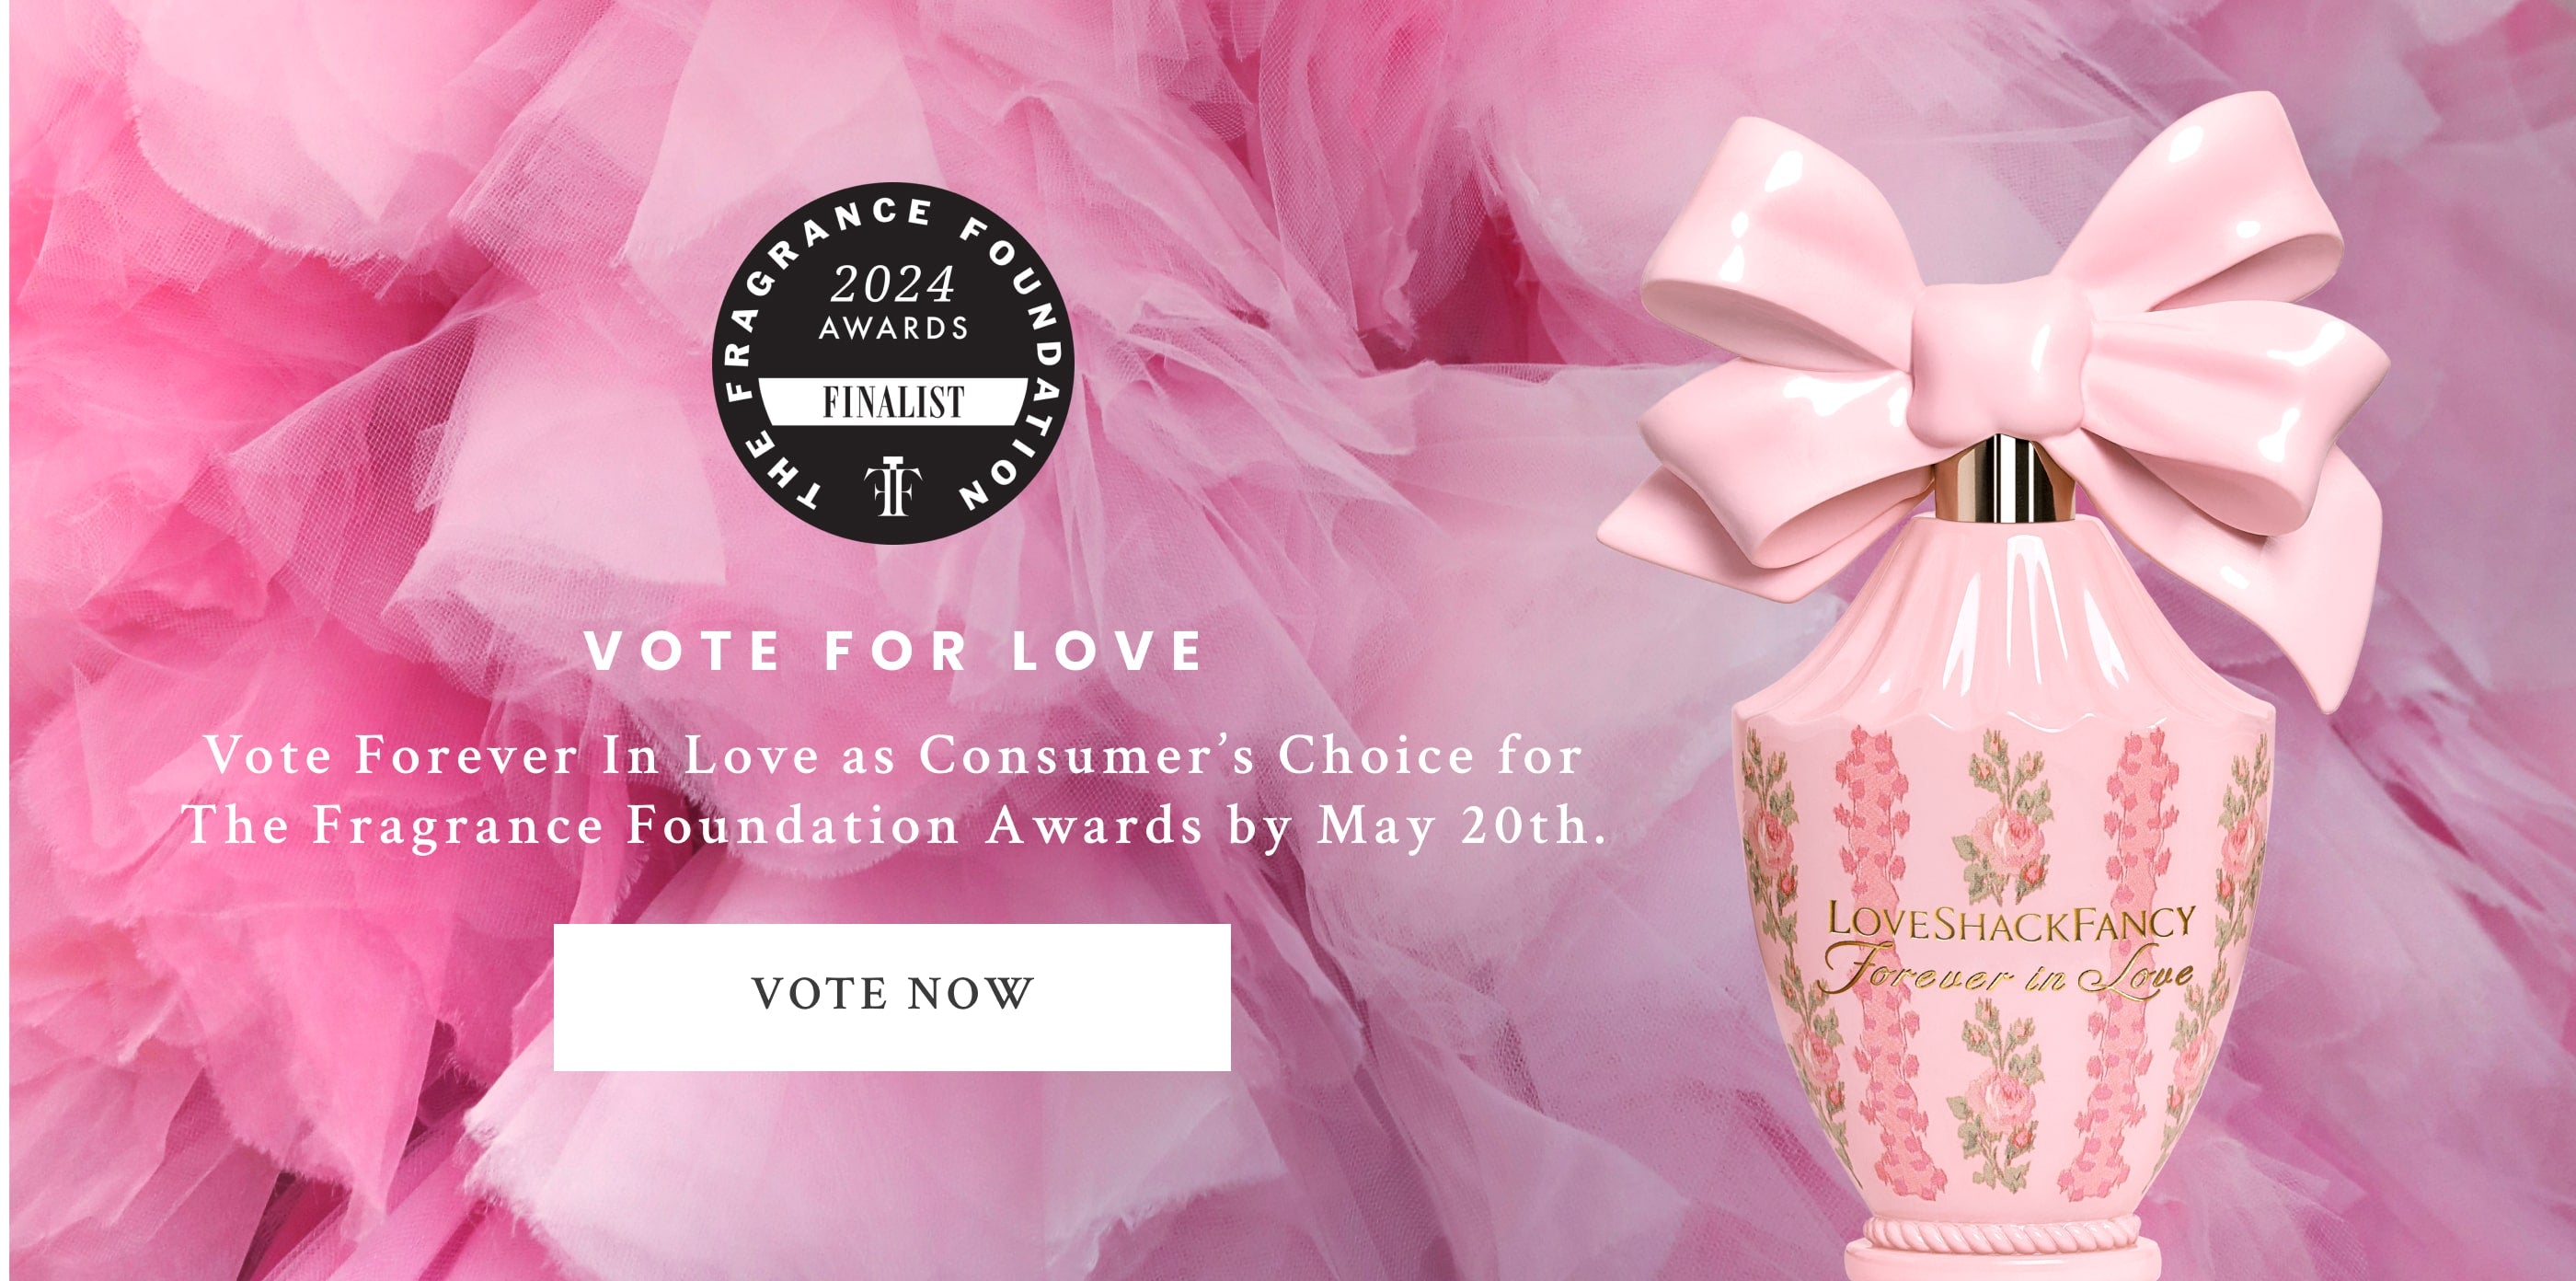 Vote for Forever In Love as Consumer's Choice for The Fragrance Foundation Awards by May 20th.